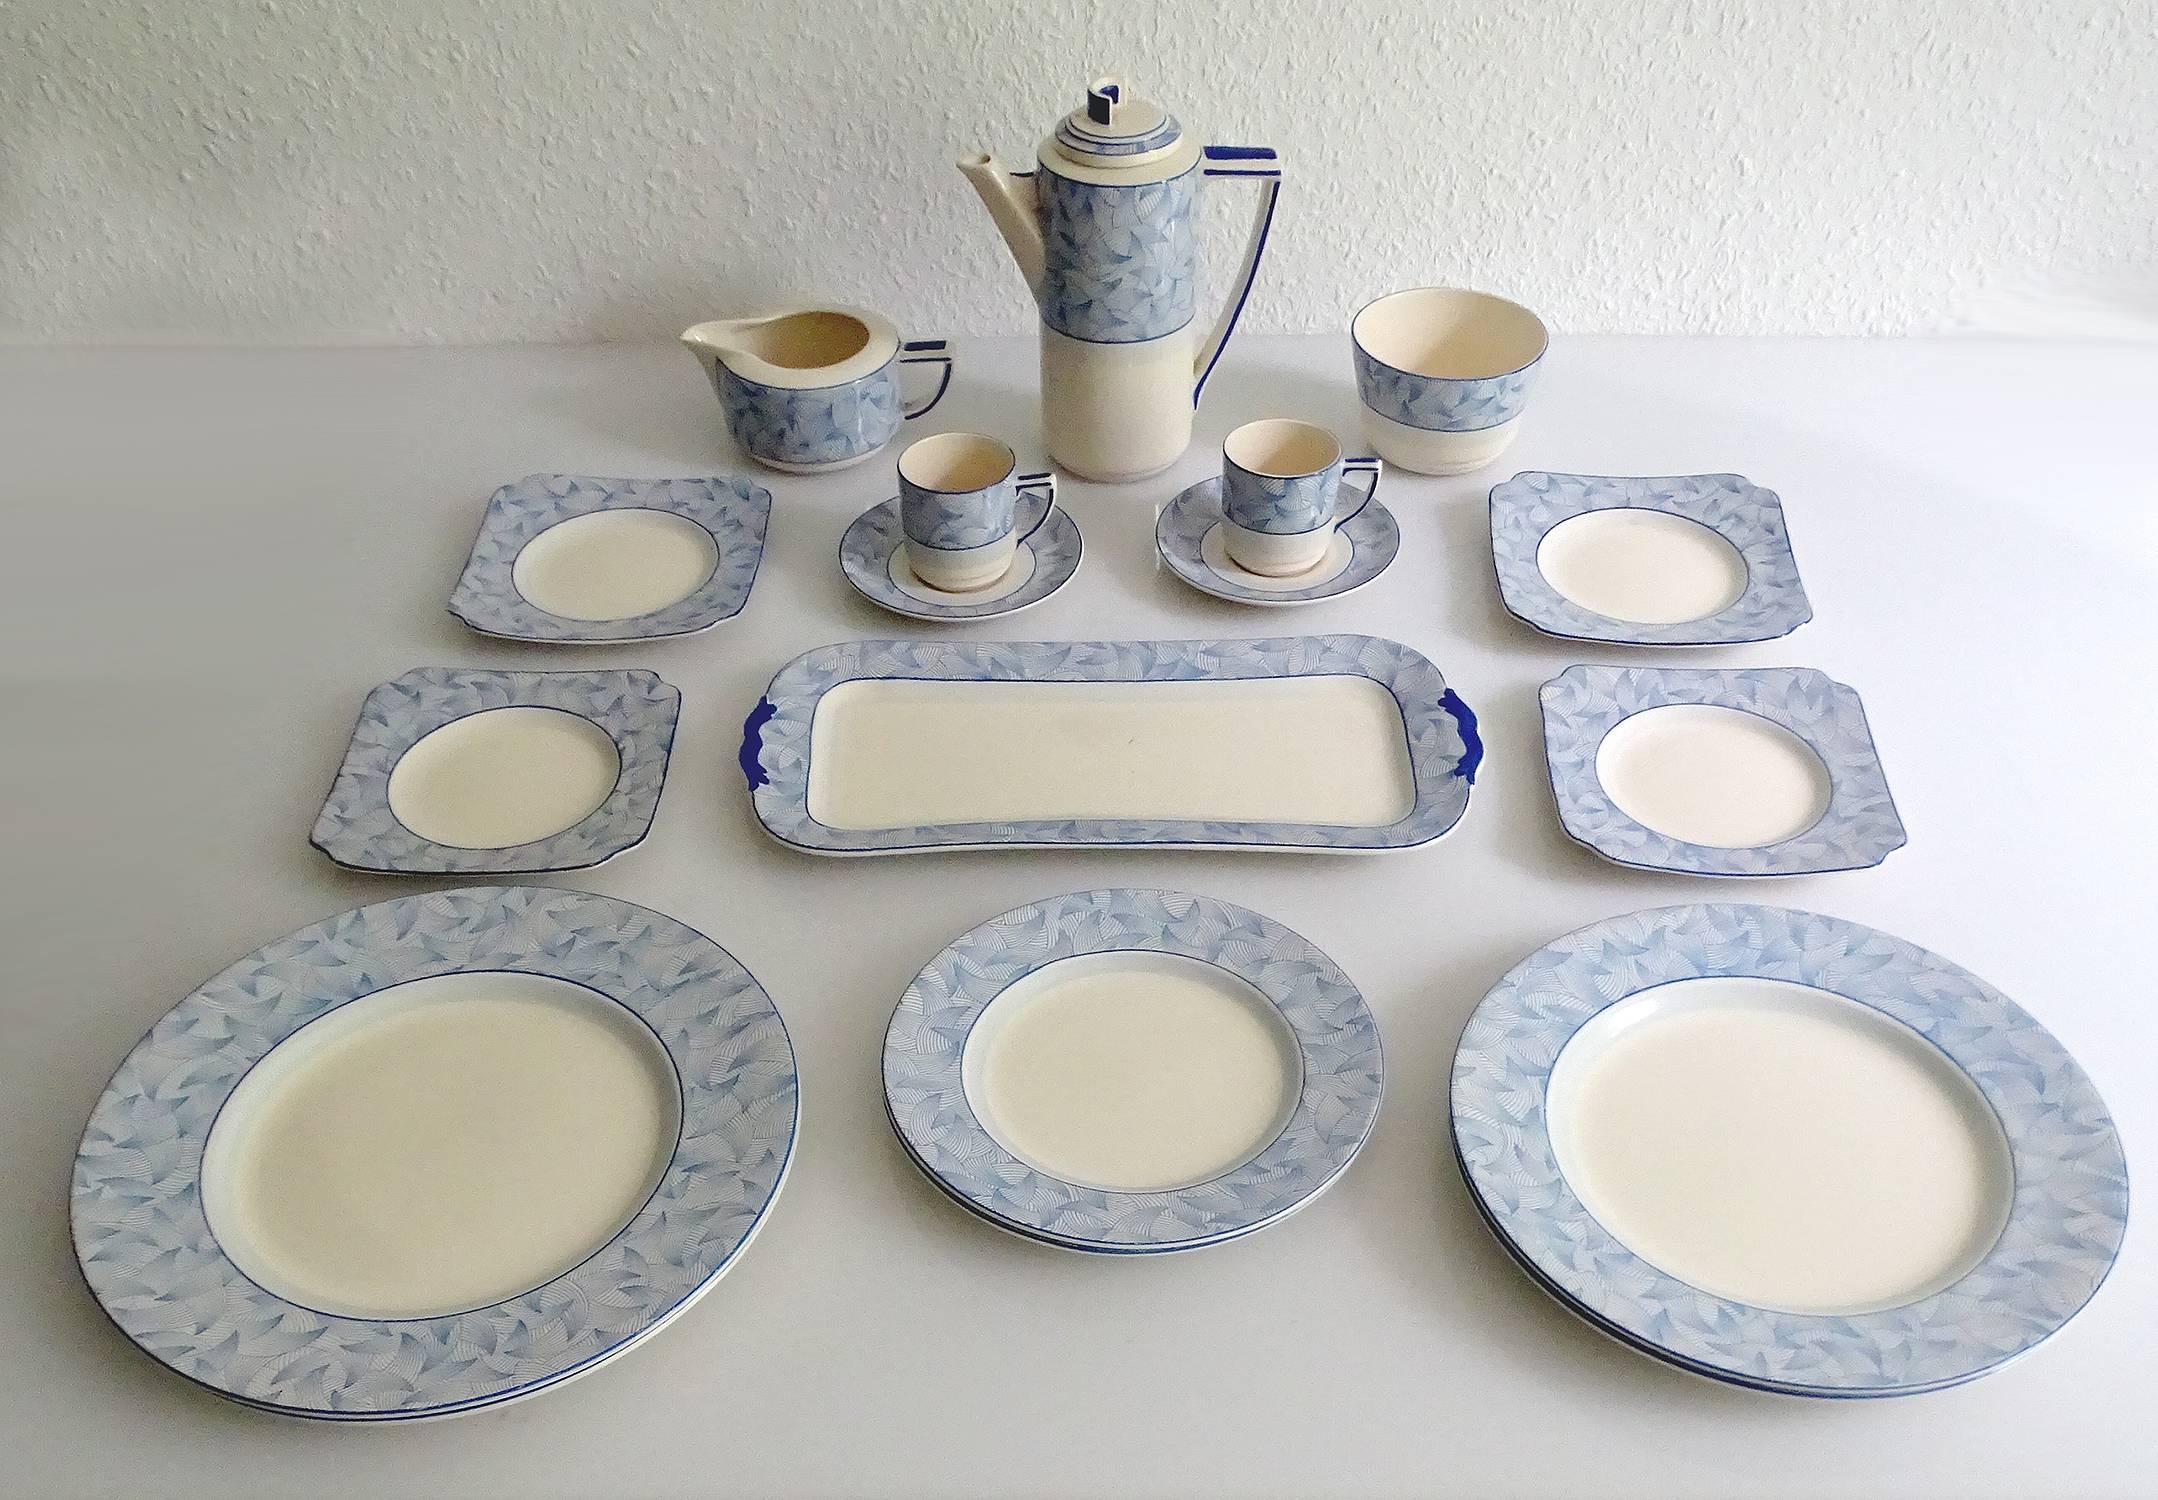 Art Deco modernist porcelain dinnerware / coffee set for two (Tete-a-Tete) manufactured by Royal Doulton during the 1930s. The design is called Envoy with stunning ultra marine patterns ressembling winglets or sails. this set is part of Royal